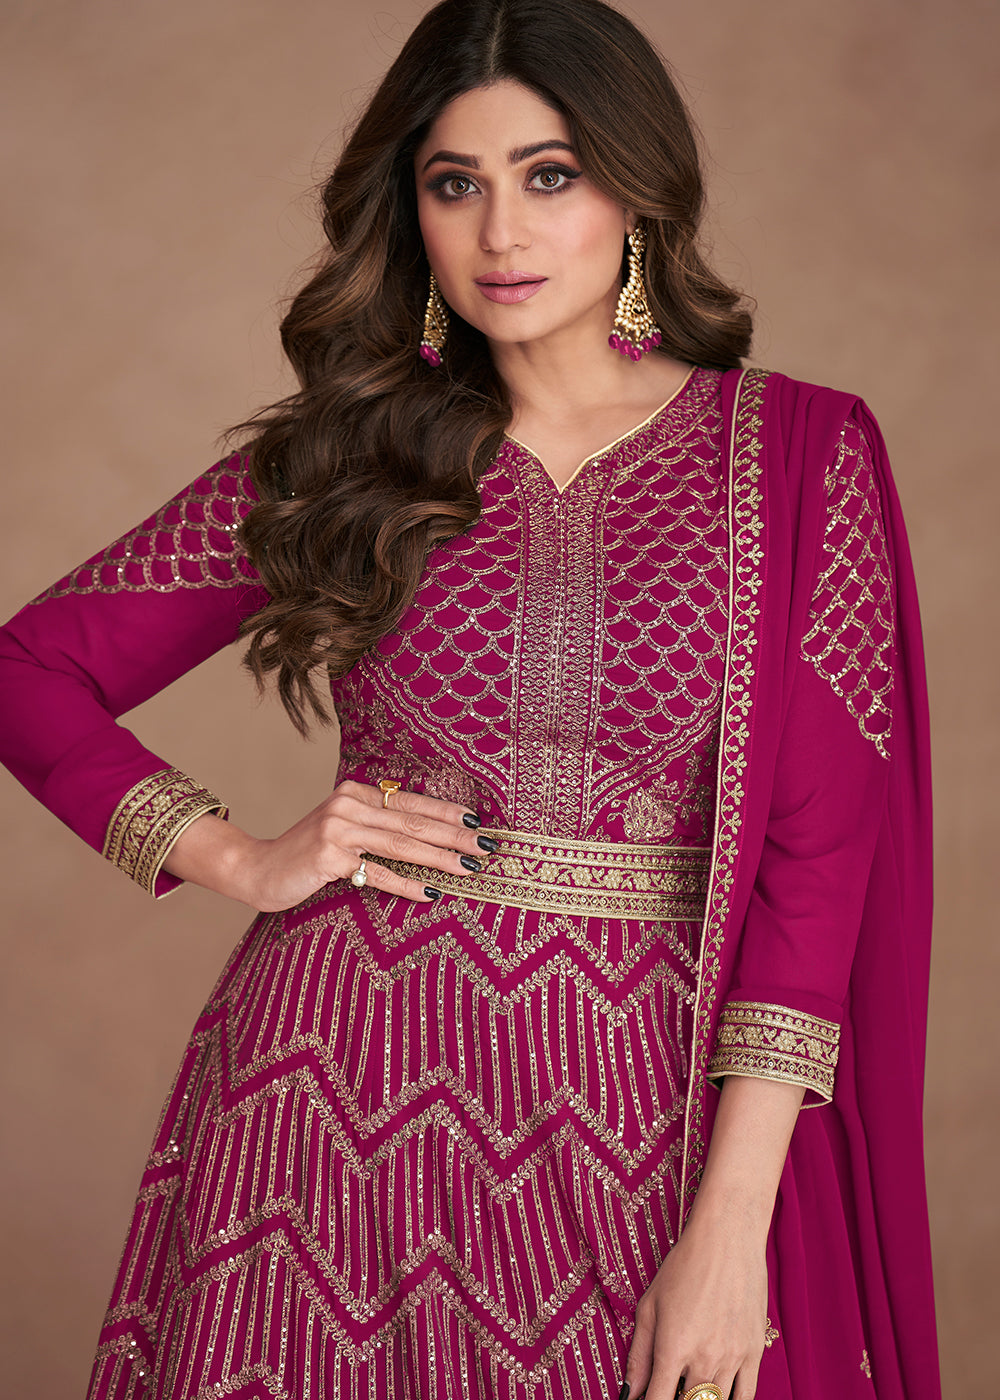 Buy Now Sequined Embroidered Hot Pink Shamita Shetty Anarkali Gown Online in USA, UK, Australia, New Zealand, Canada, Italy & Worldwide at Empress Clothing.